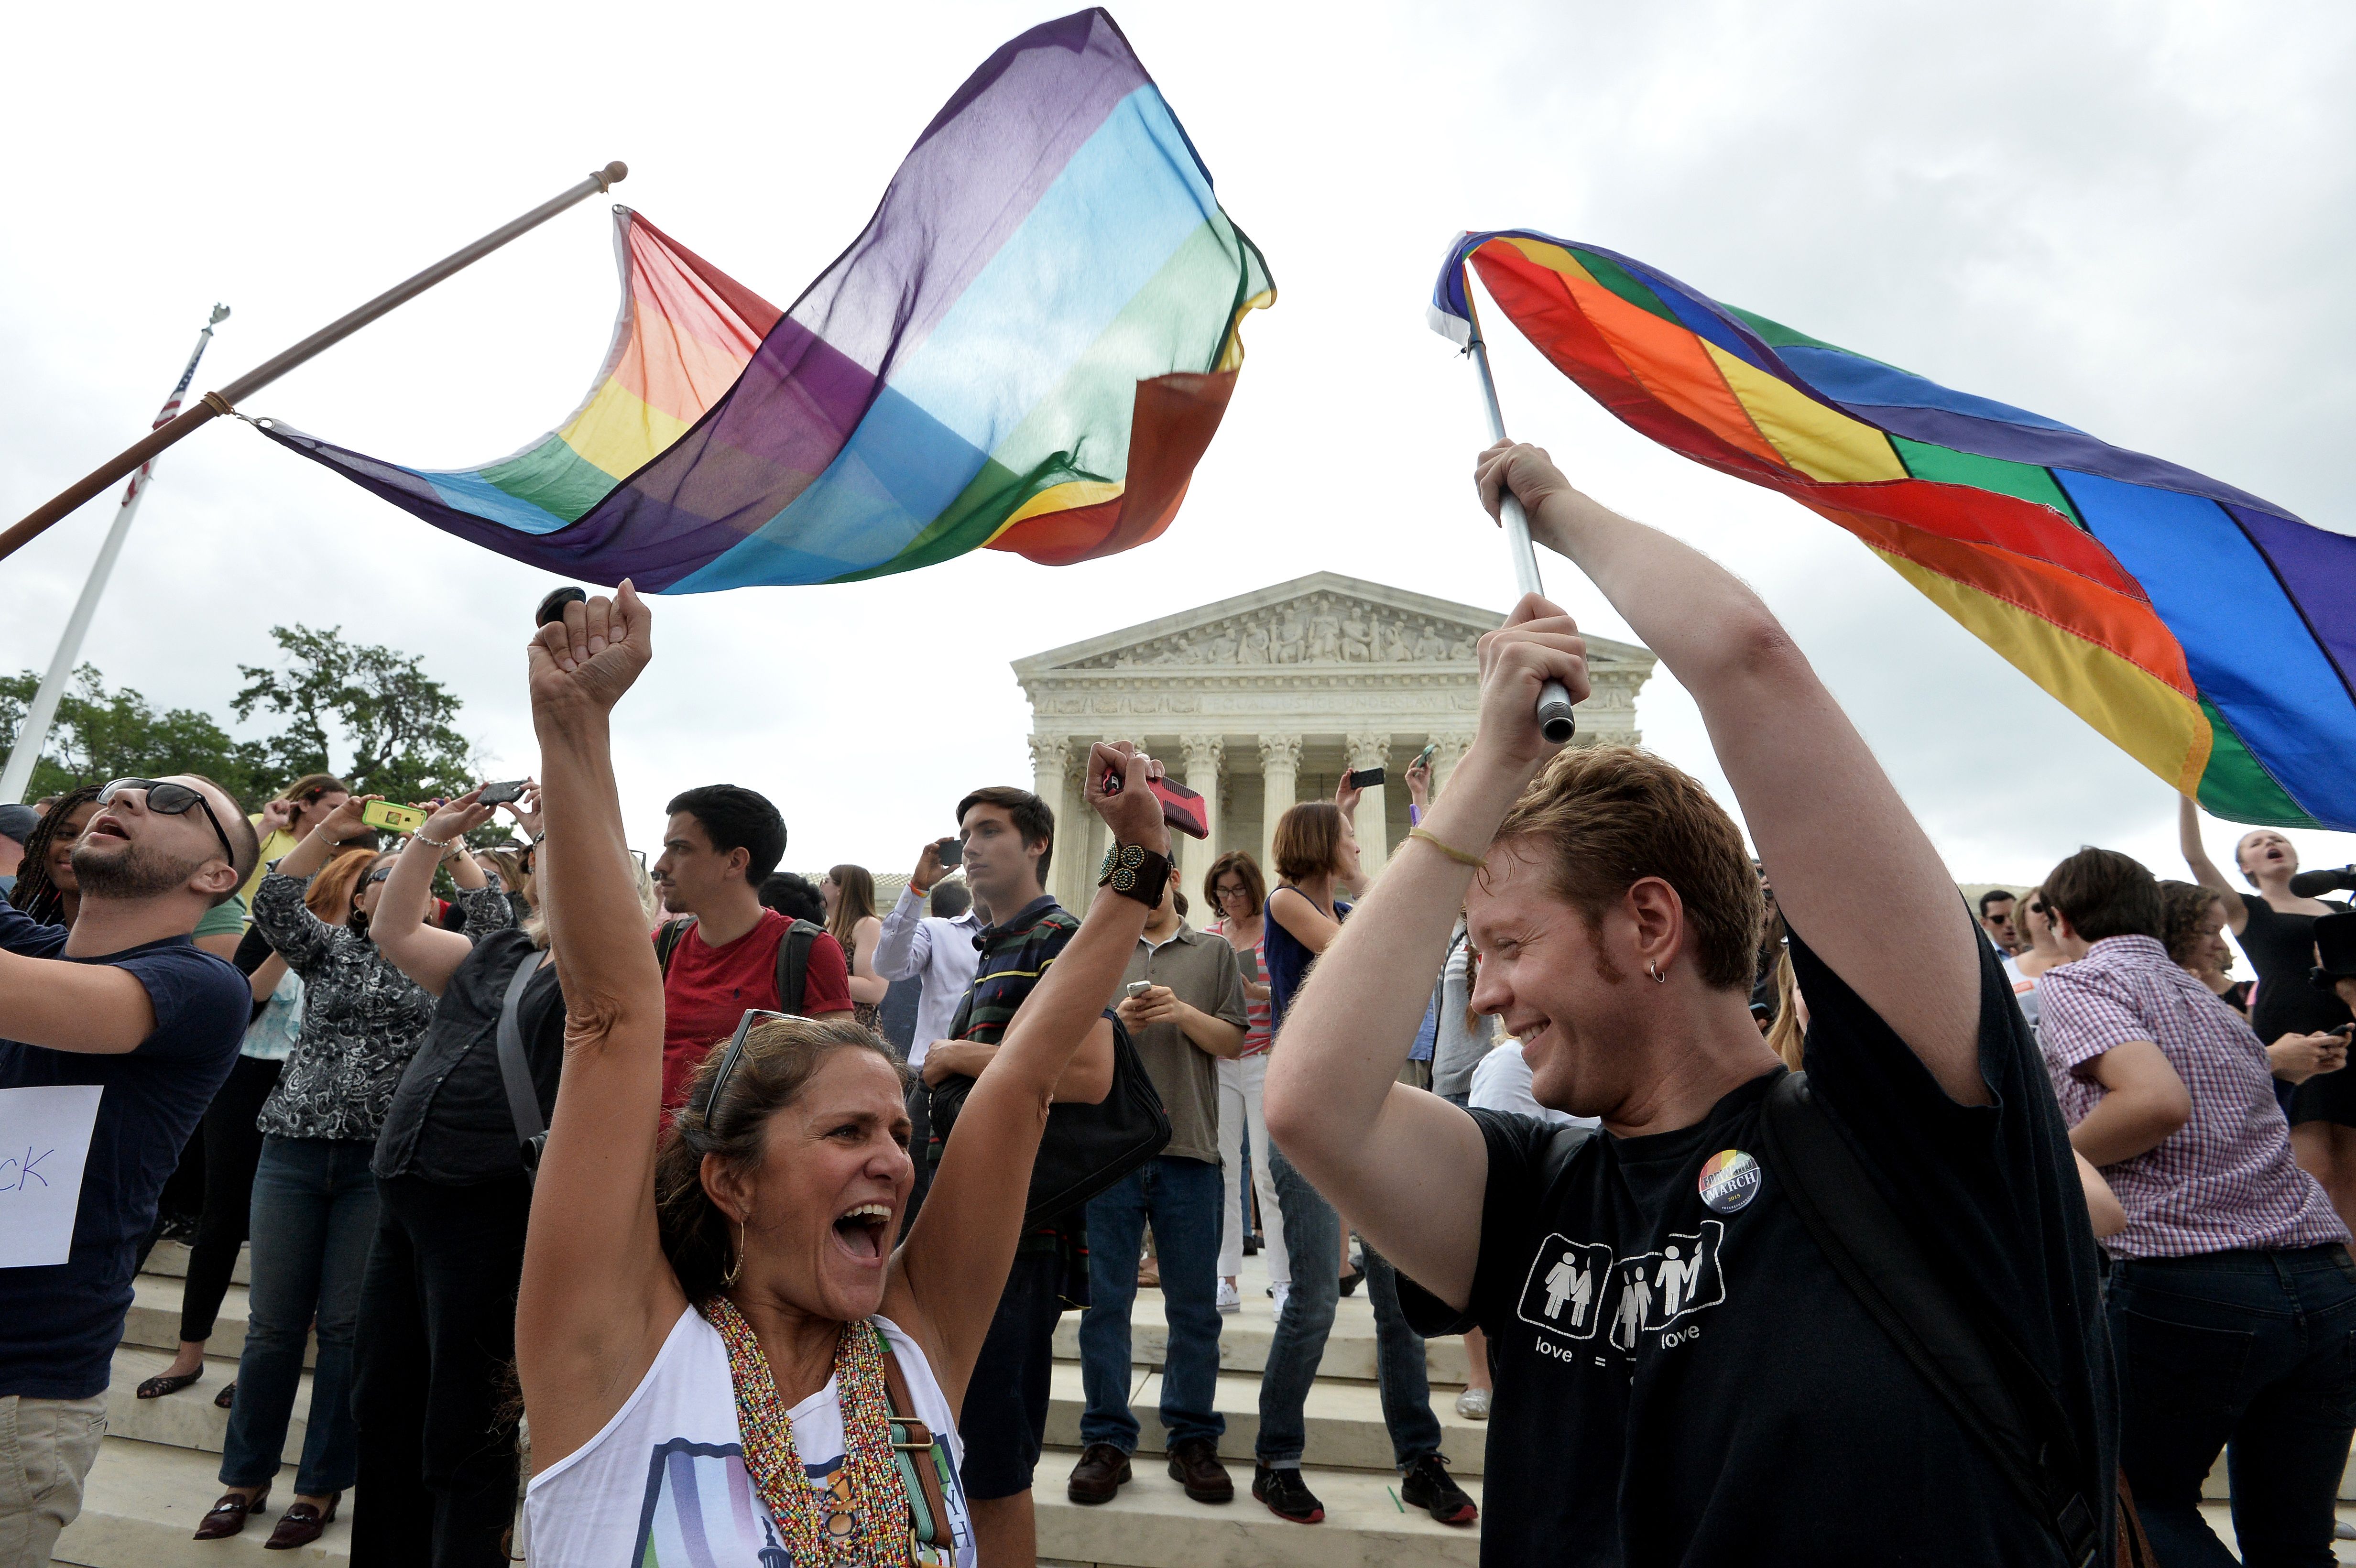 People celebrate outside the Supreme Court in Washington, DC on June 26, 2015 after its historic decision on gay marriage. (Mladen Antonov/AFP/Getty Images)